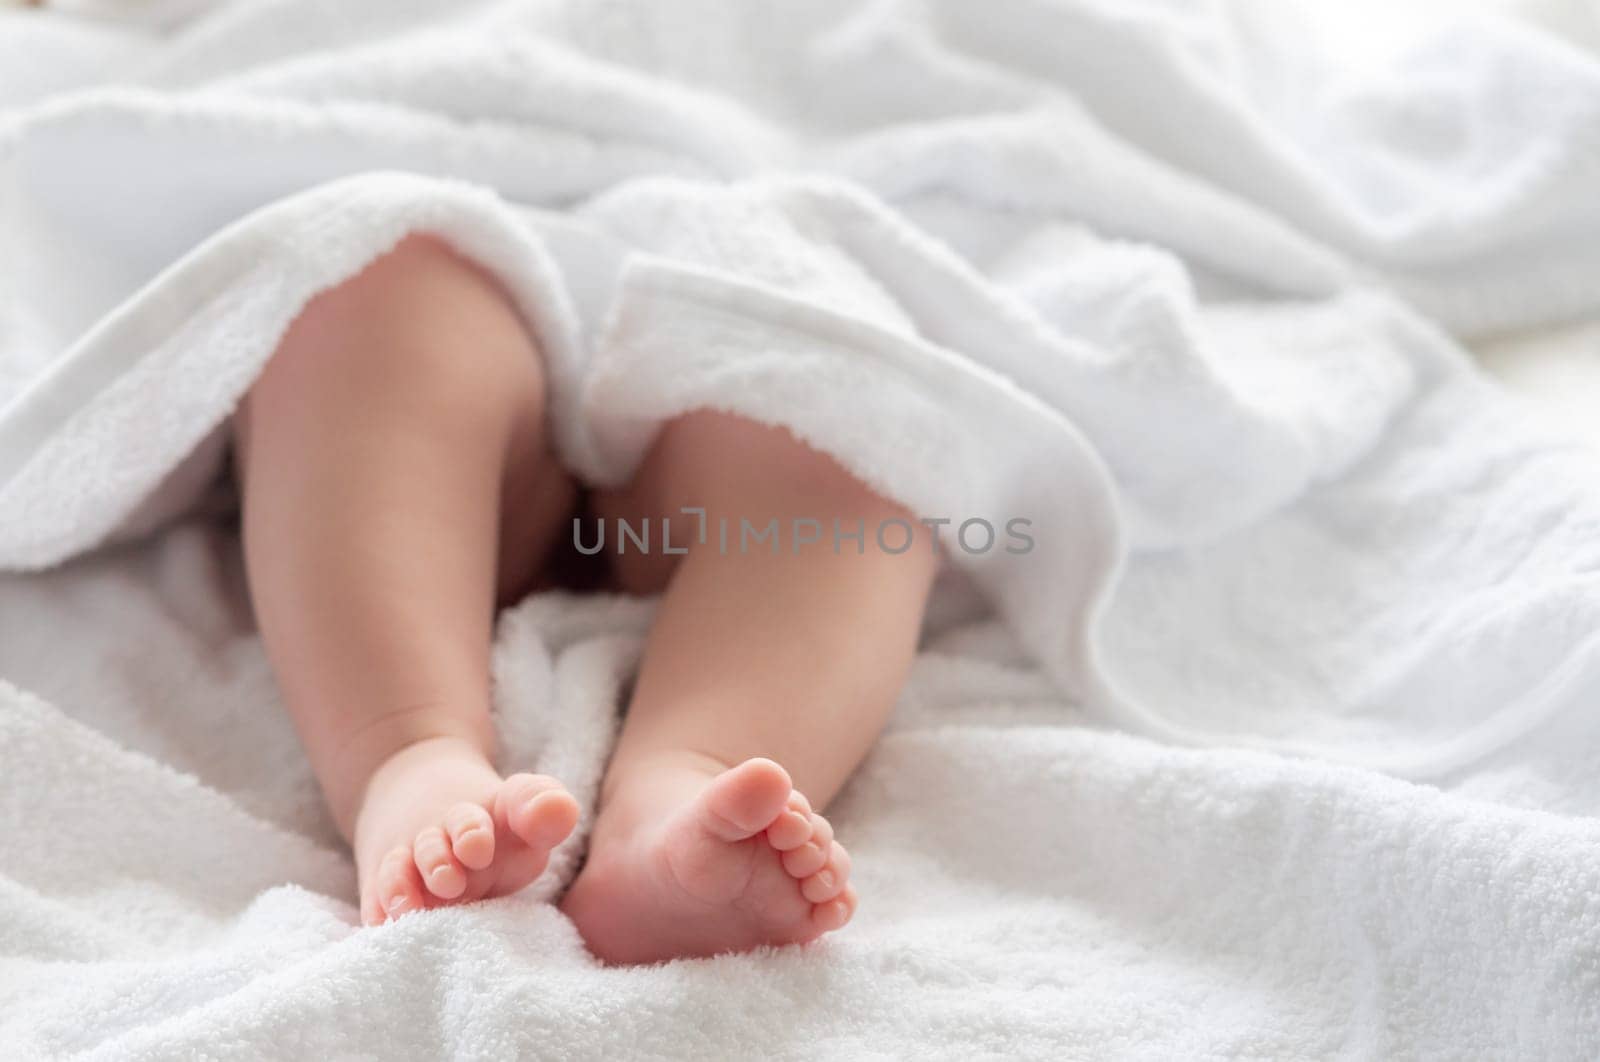 Baby's legs wrapped in a white towel's embrace. Concept of nurturing moments after bath by Mariakray